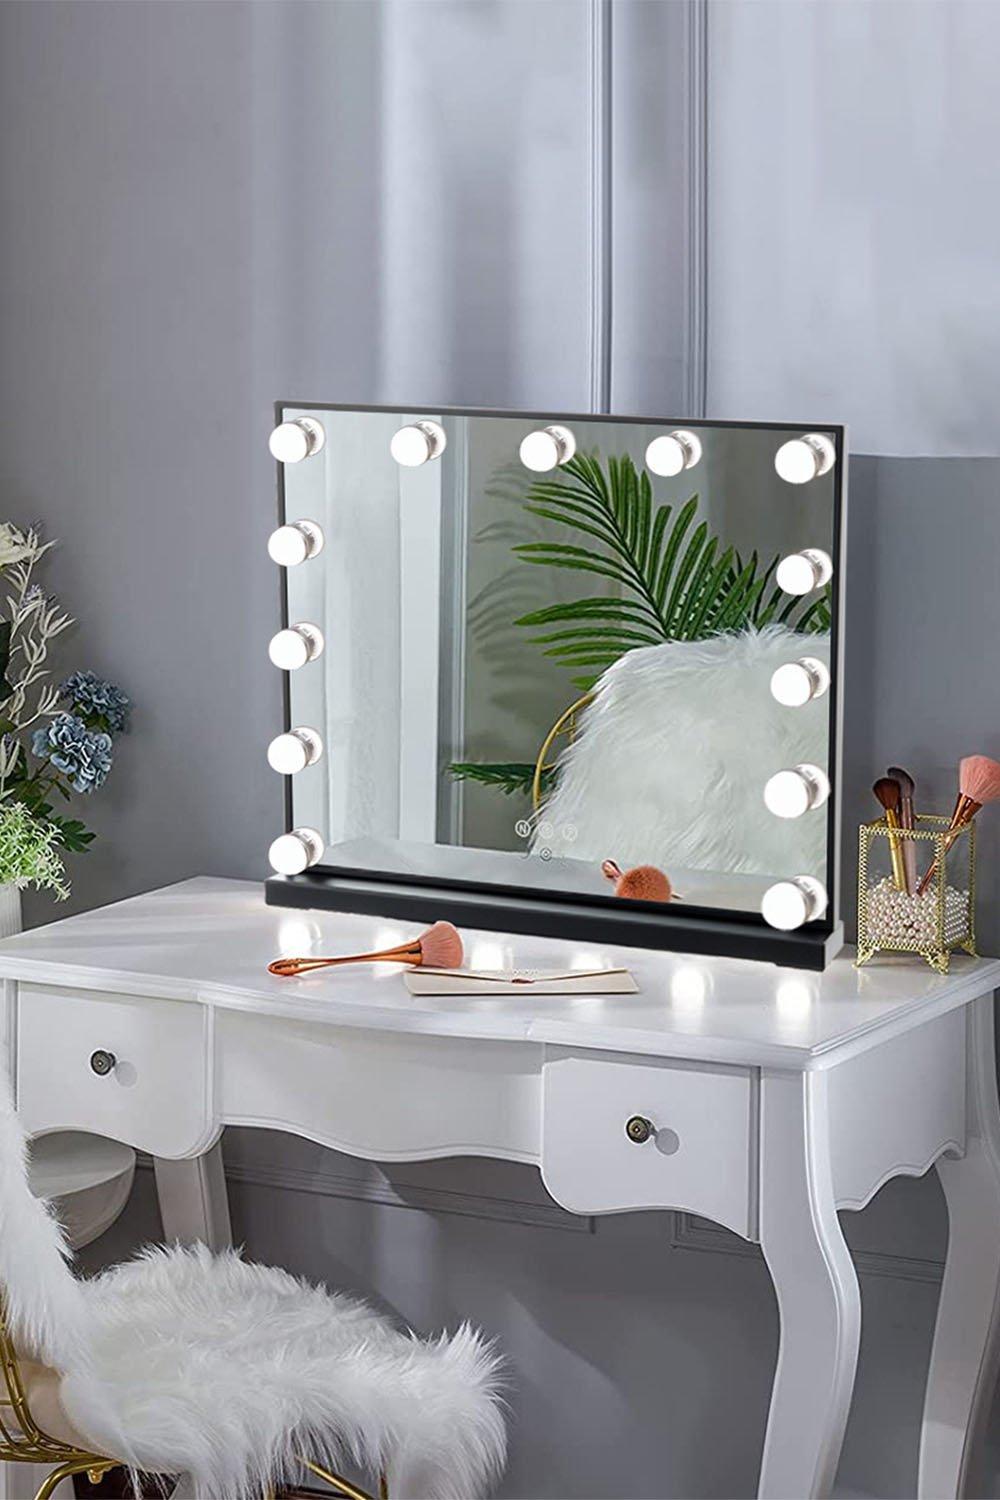 Rectangle LED Makeup Vanity Mirror with 3 Color Light